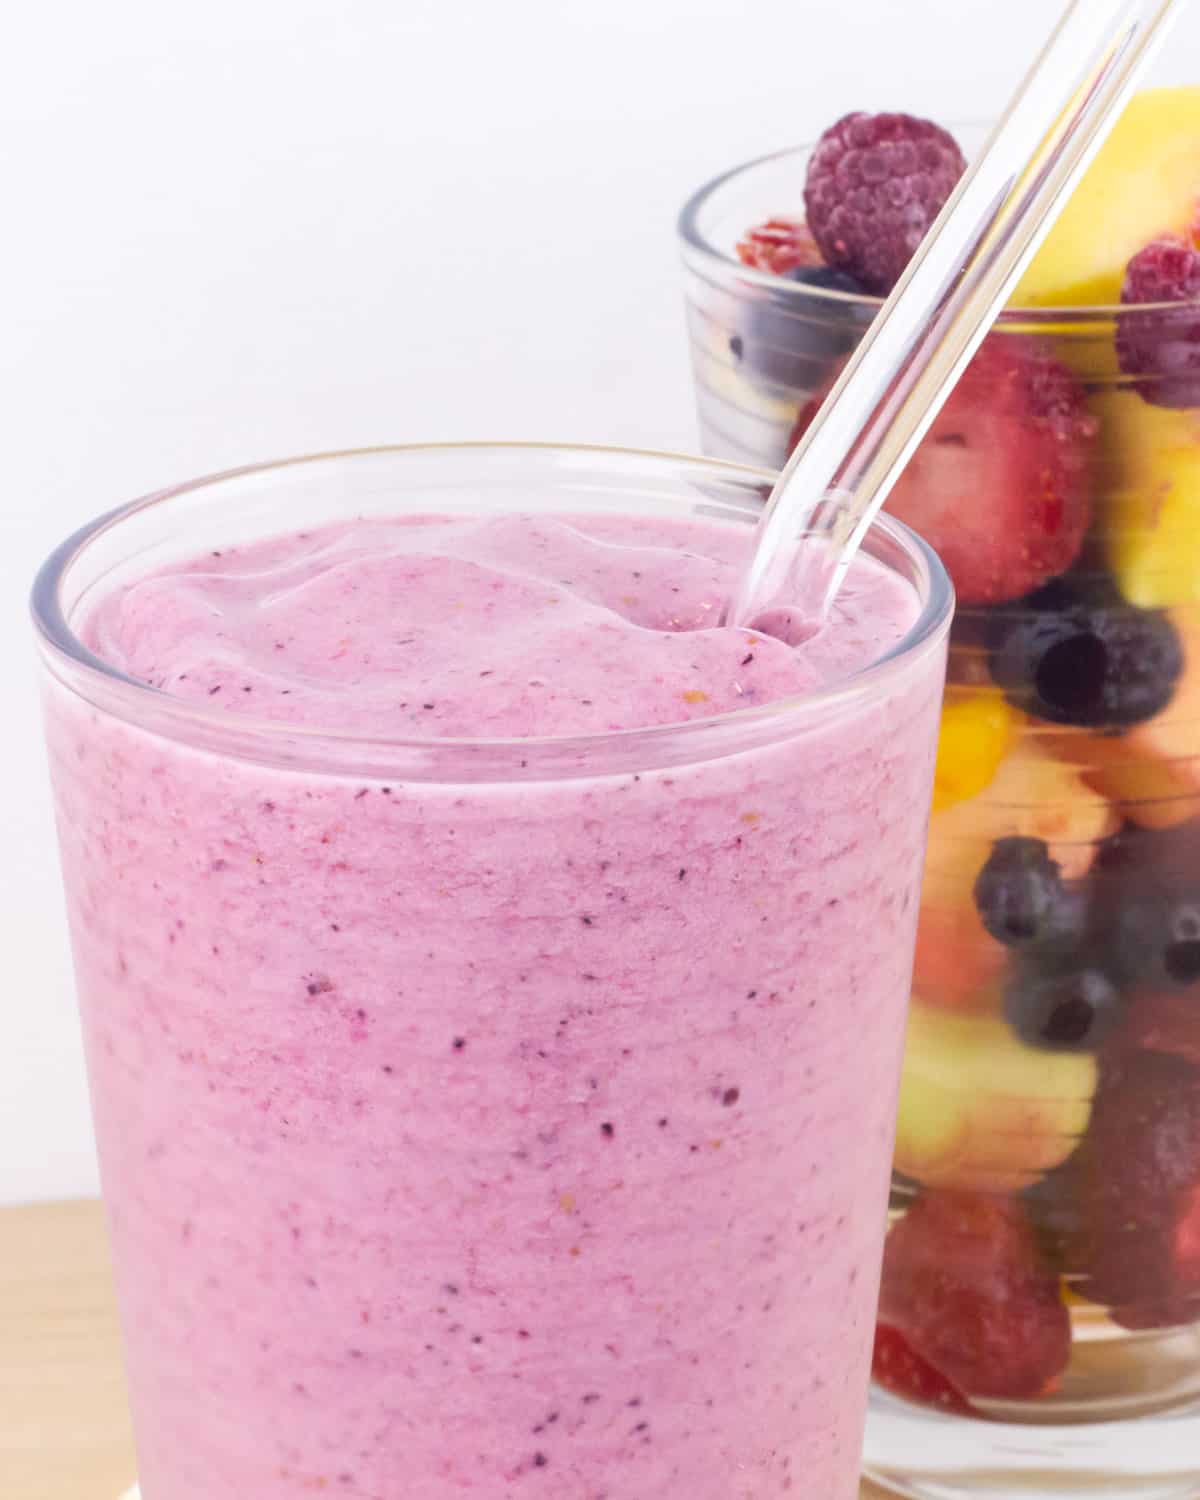 How To Make A Smoothie In A Blender With Frozen Fruit